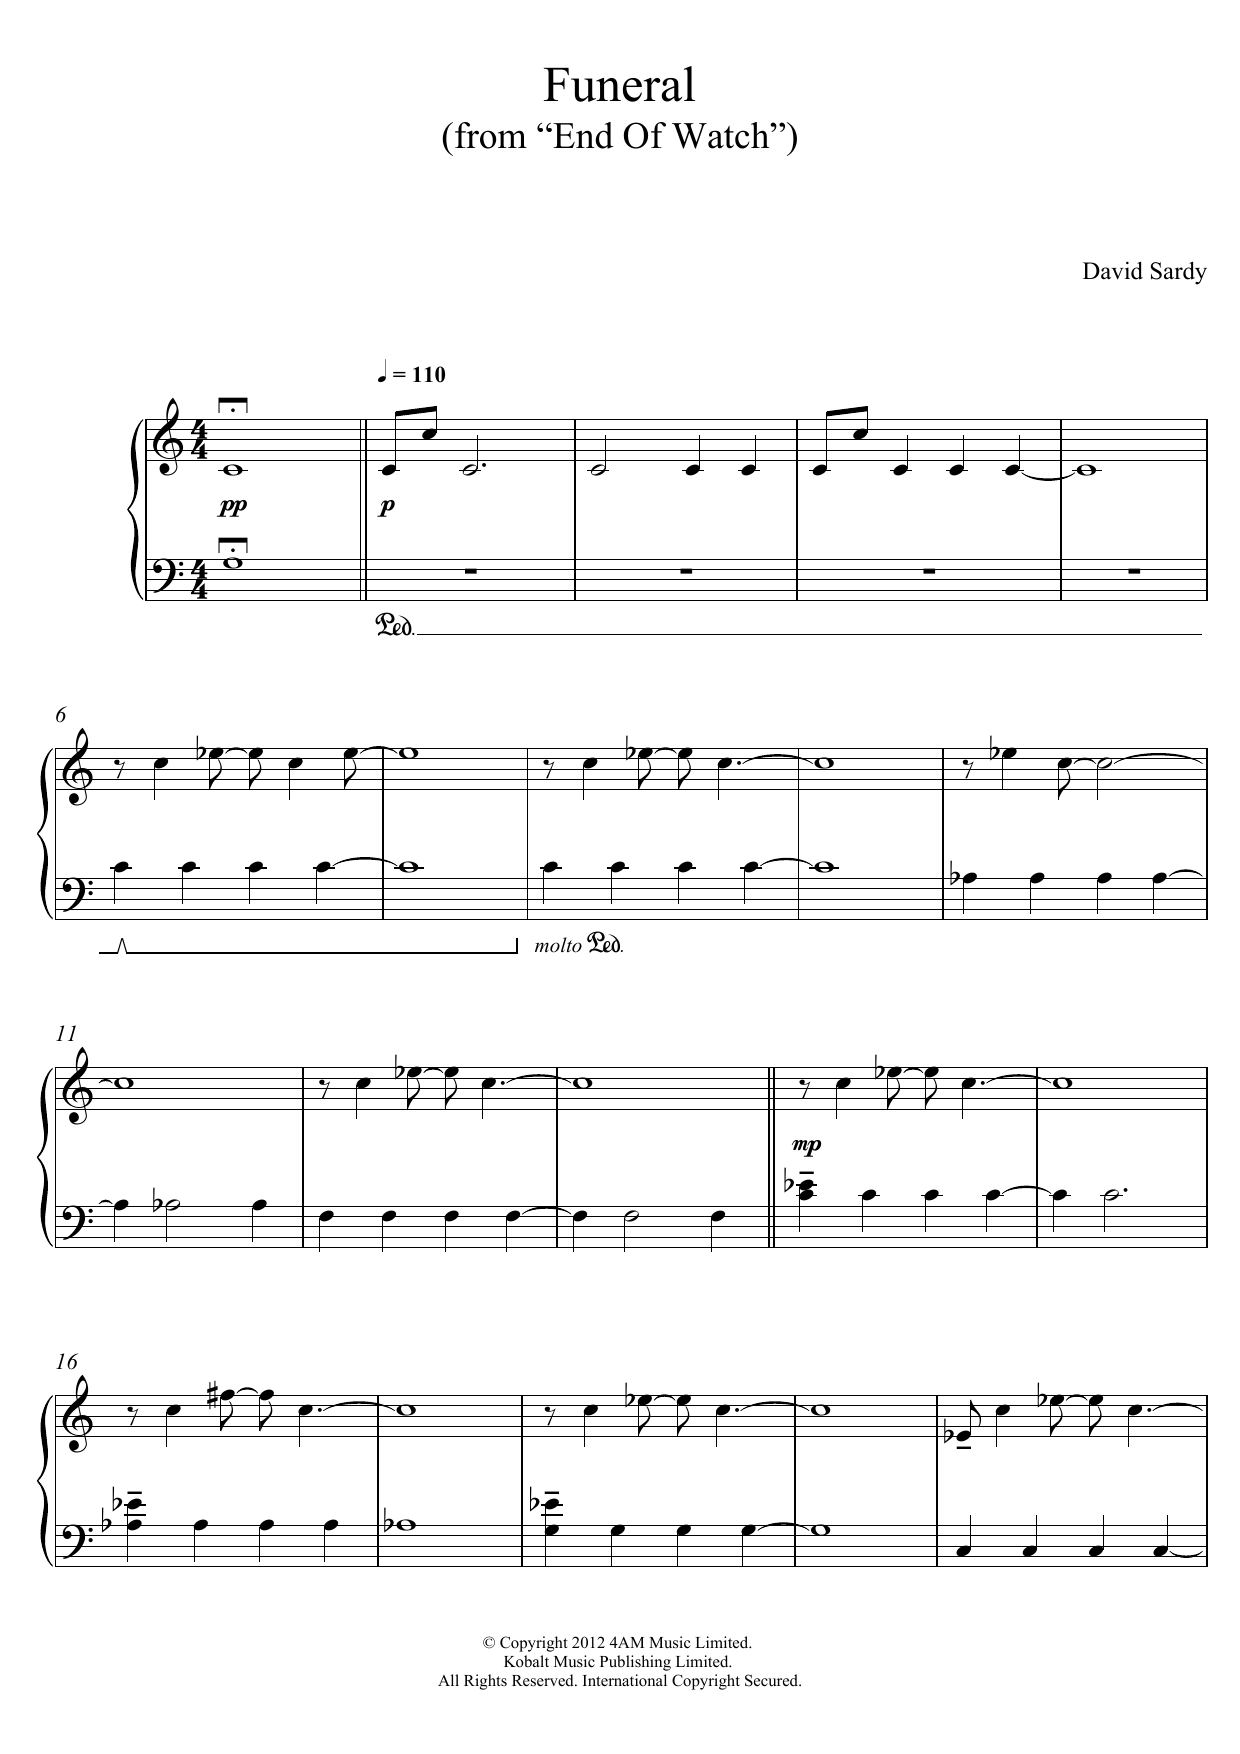 Funeral (From End Of Watch) sheet music